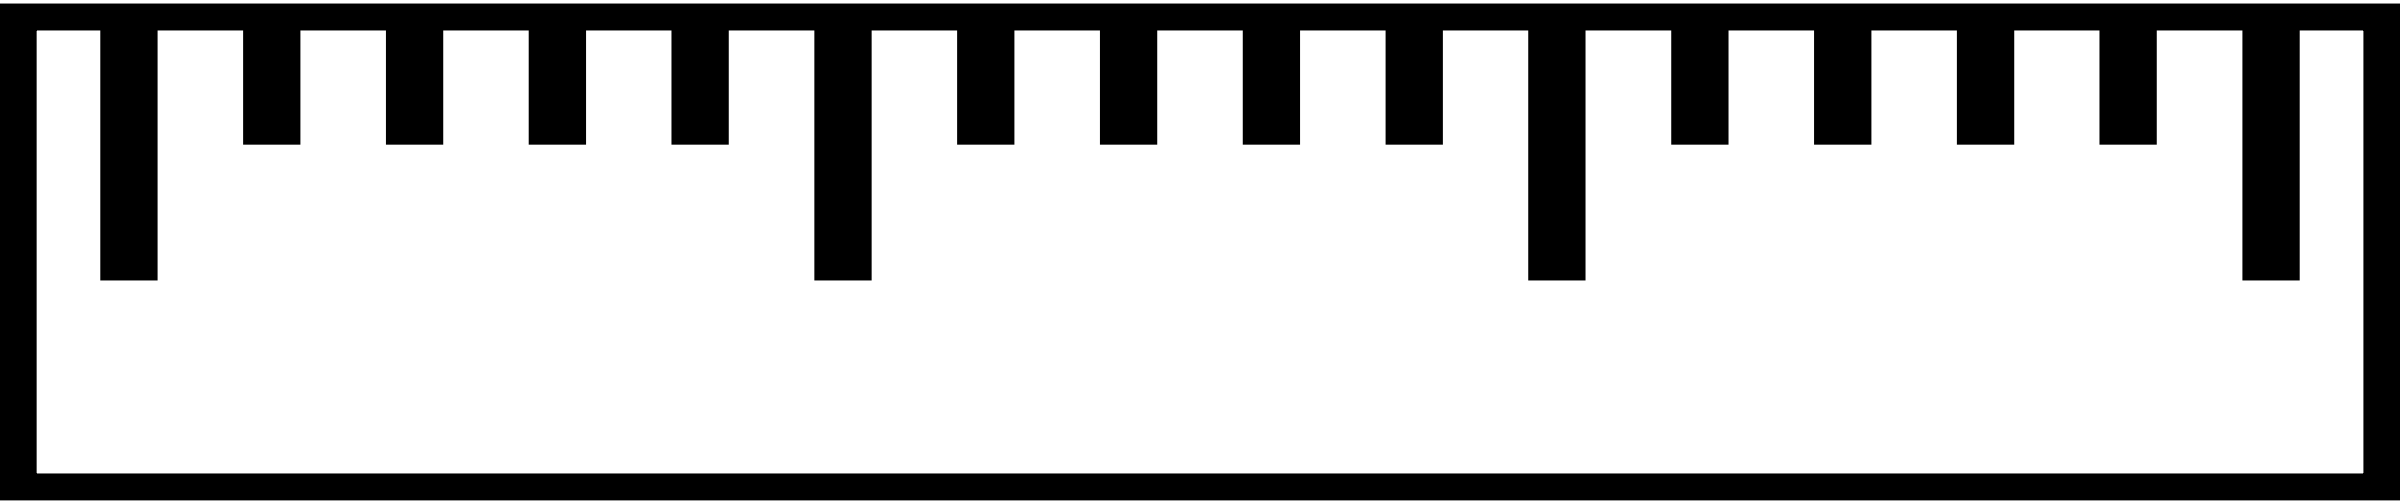 Ruler Black And White Clipart 